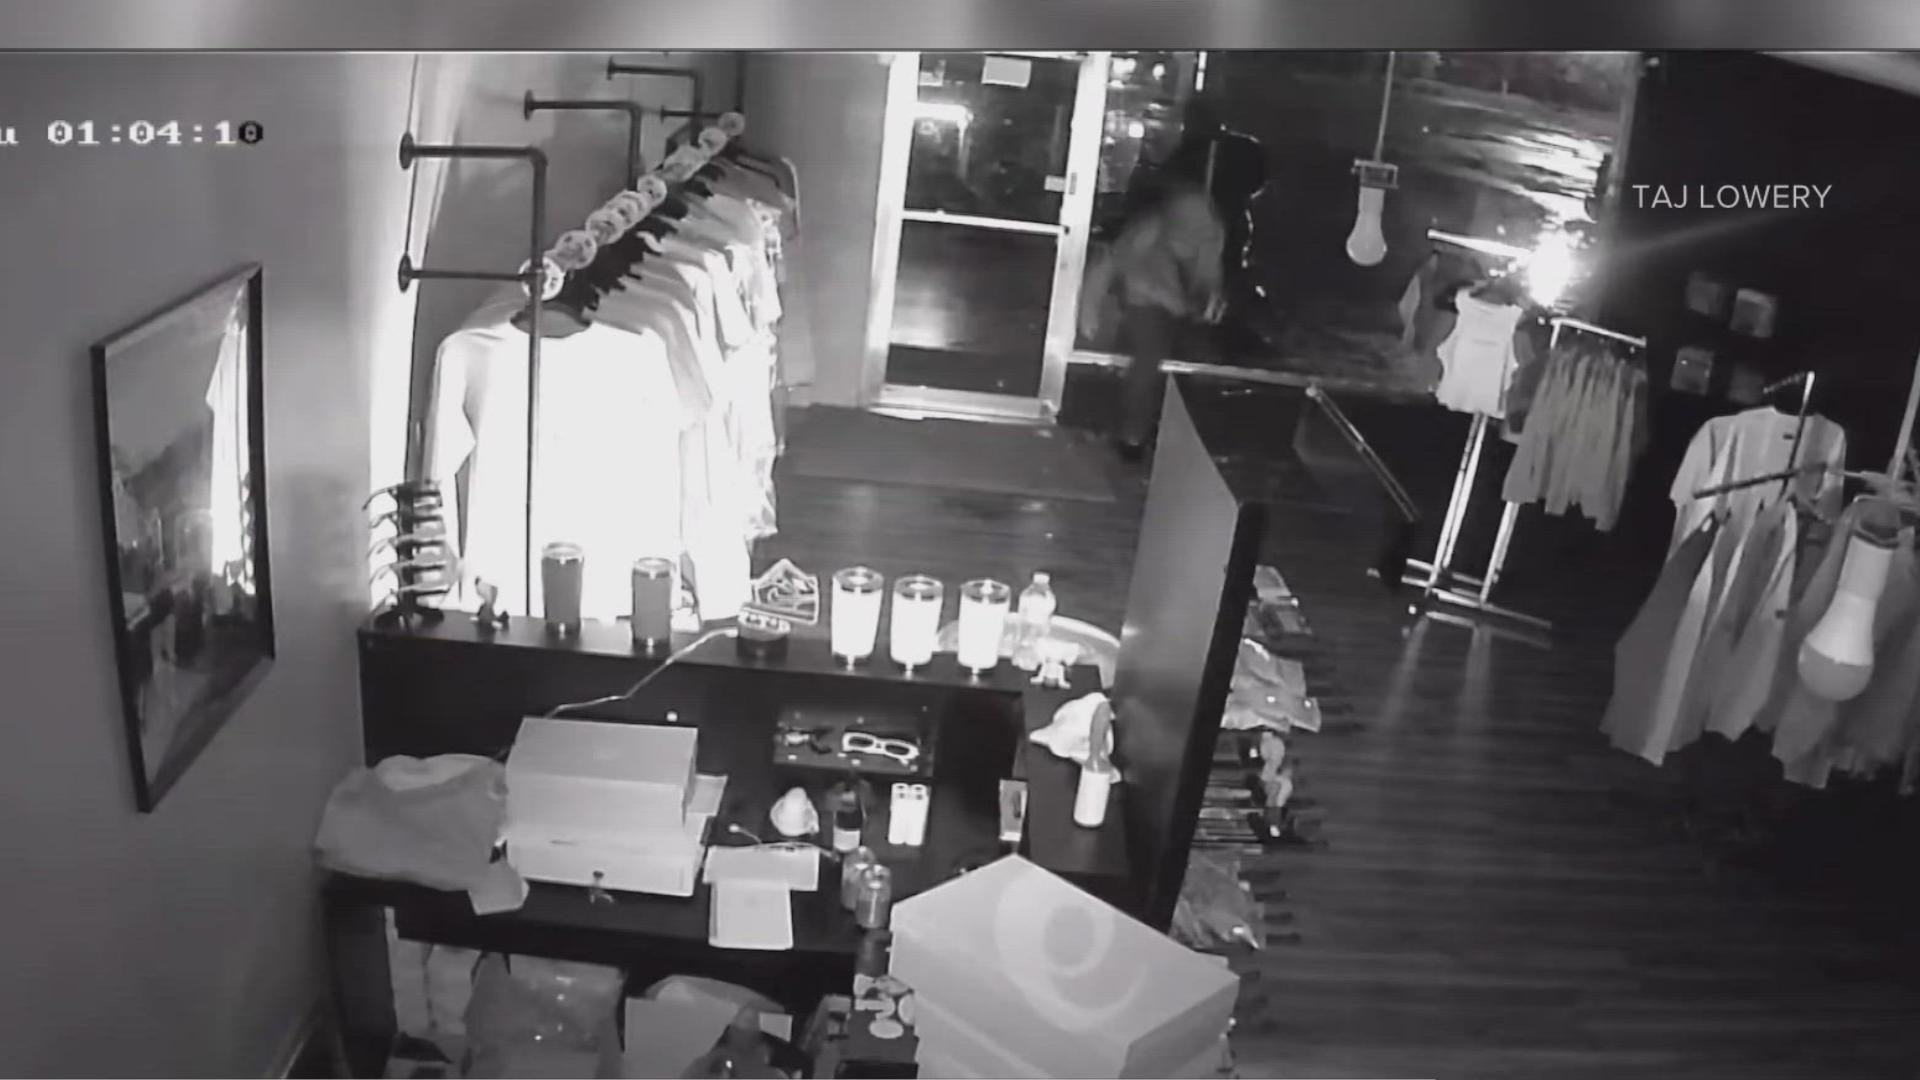 Surveillance video shows a masked intruder breaking the front window, coming into the store and using what looks like a blow torch to light merchandise on fire.